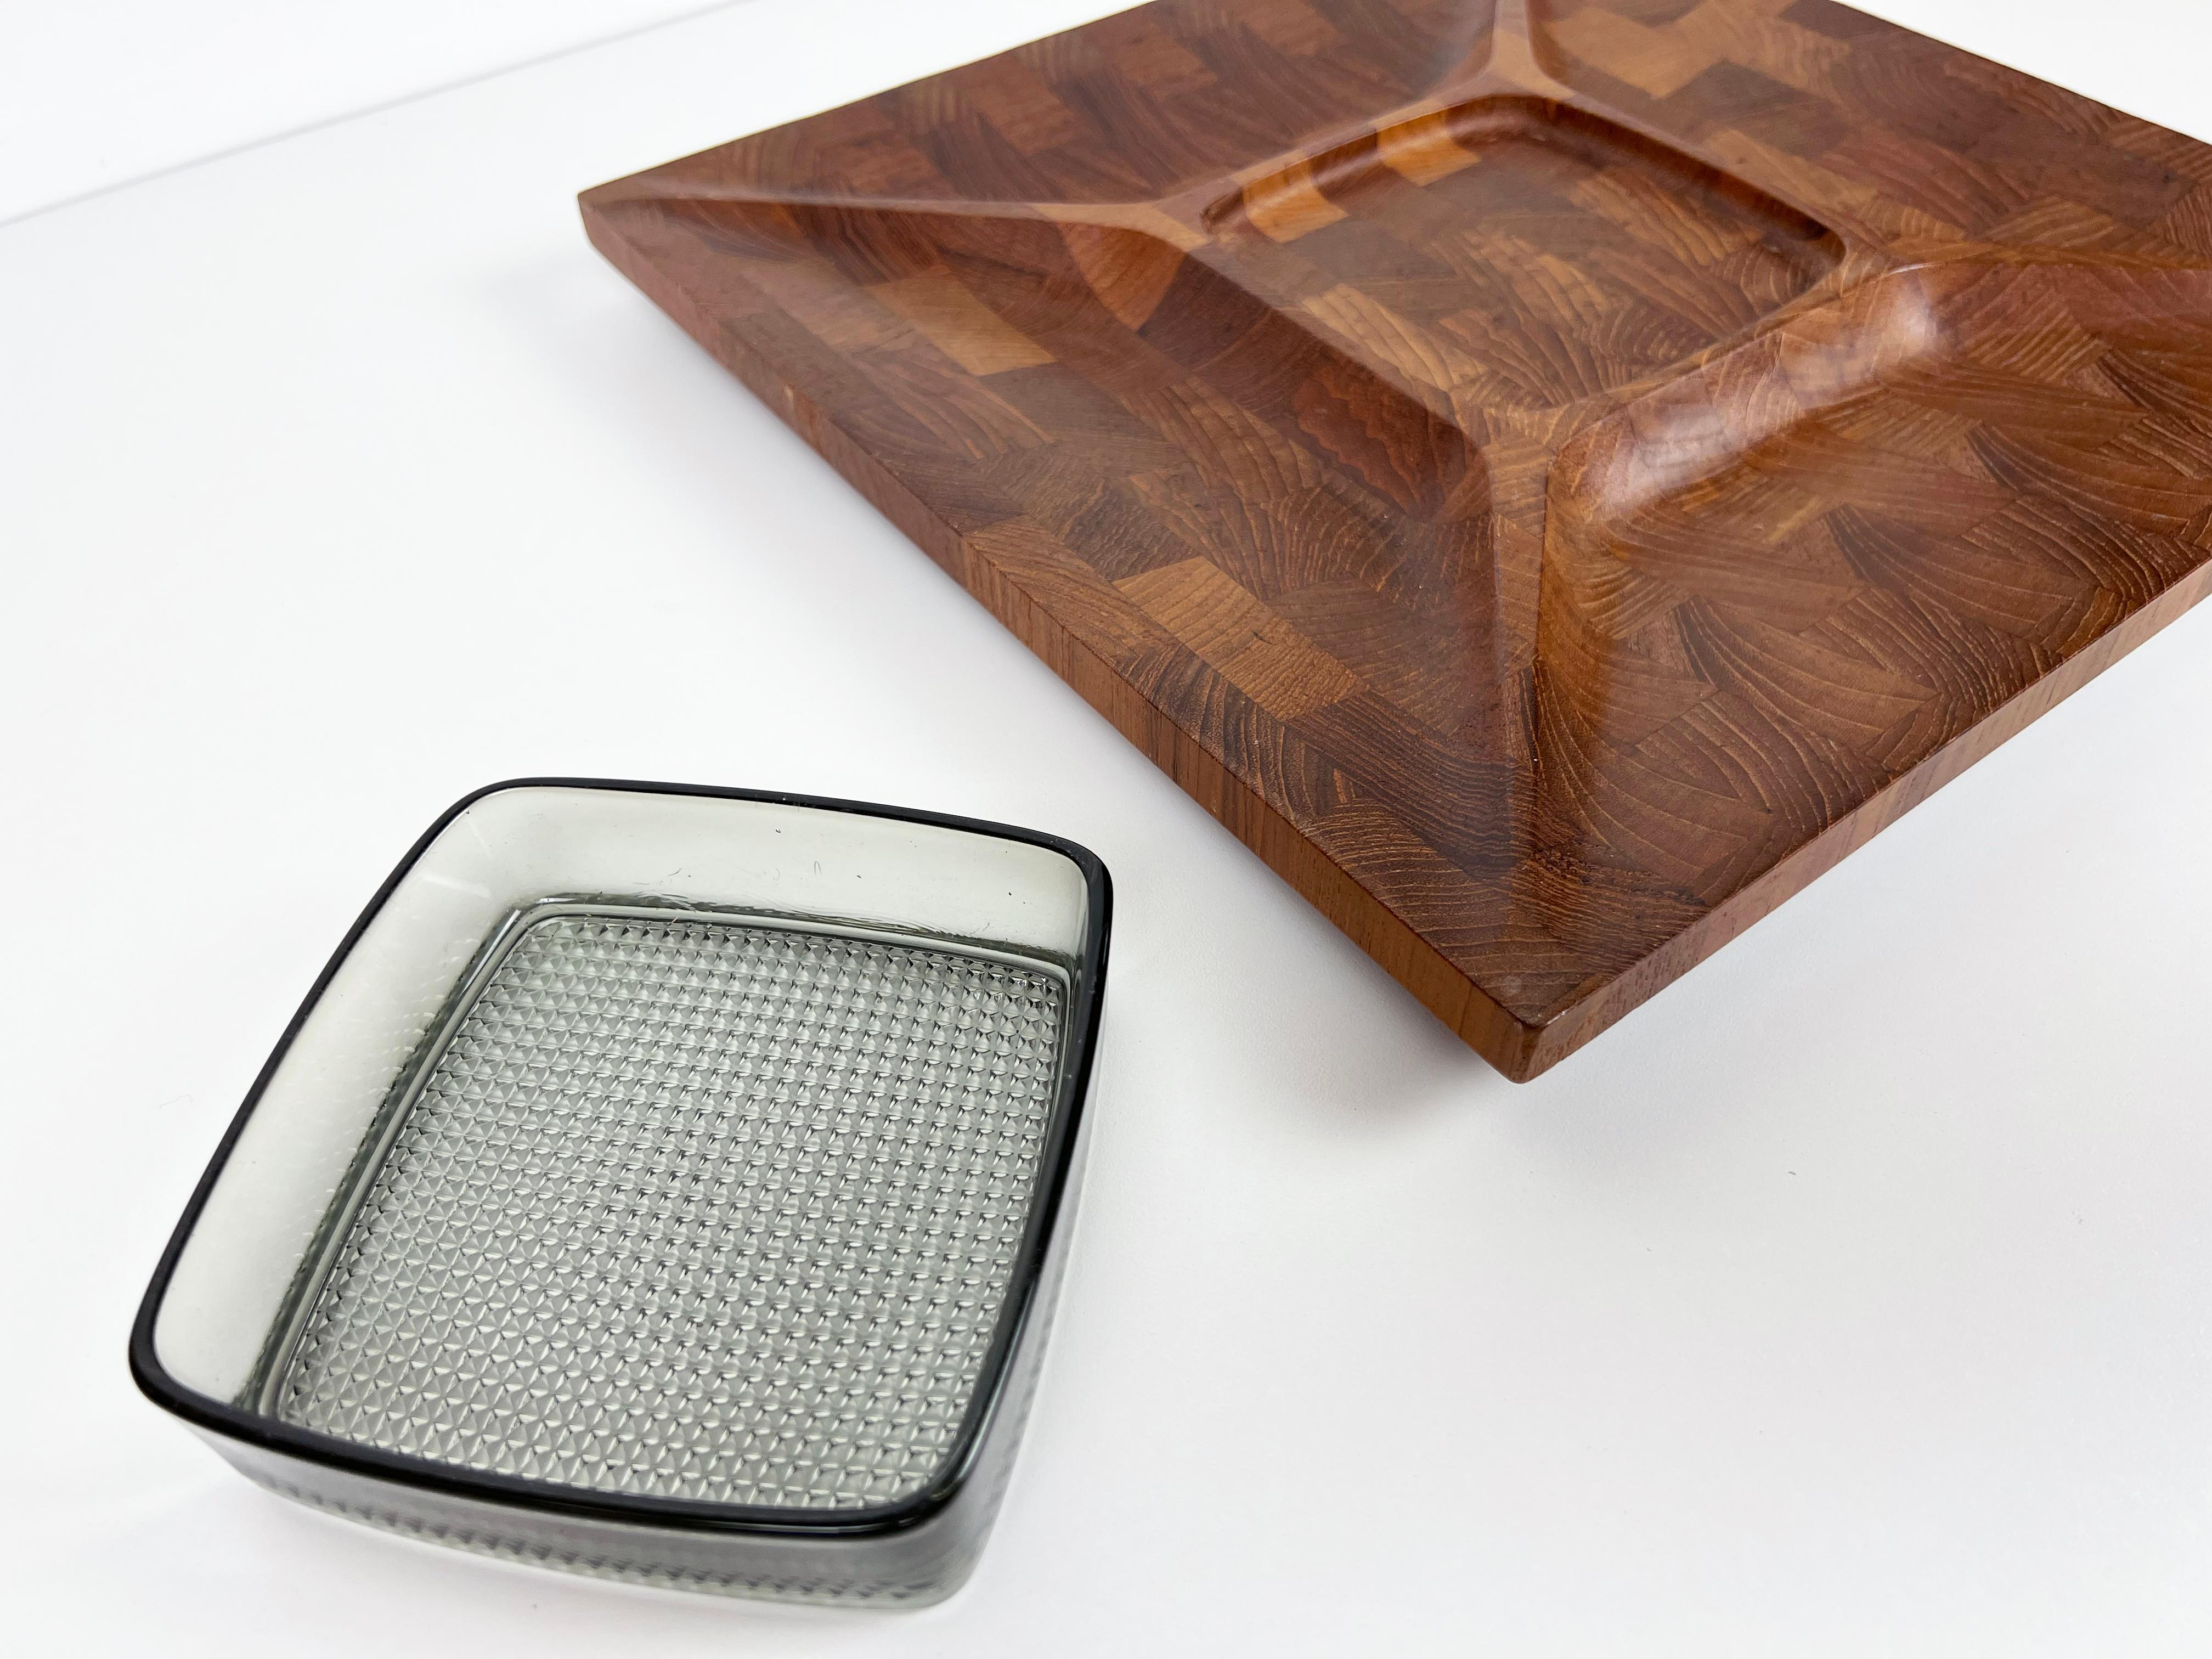 Danish Vintage Divided Teak Serving Tray with Glass Dish by Digsmed For Sale